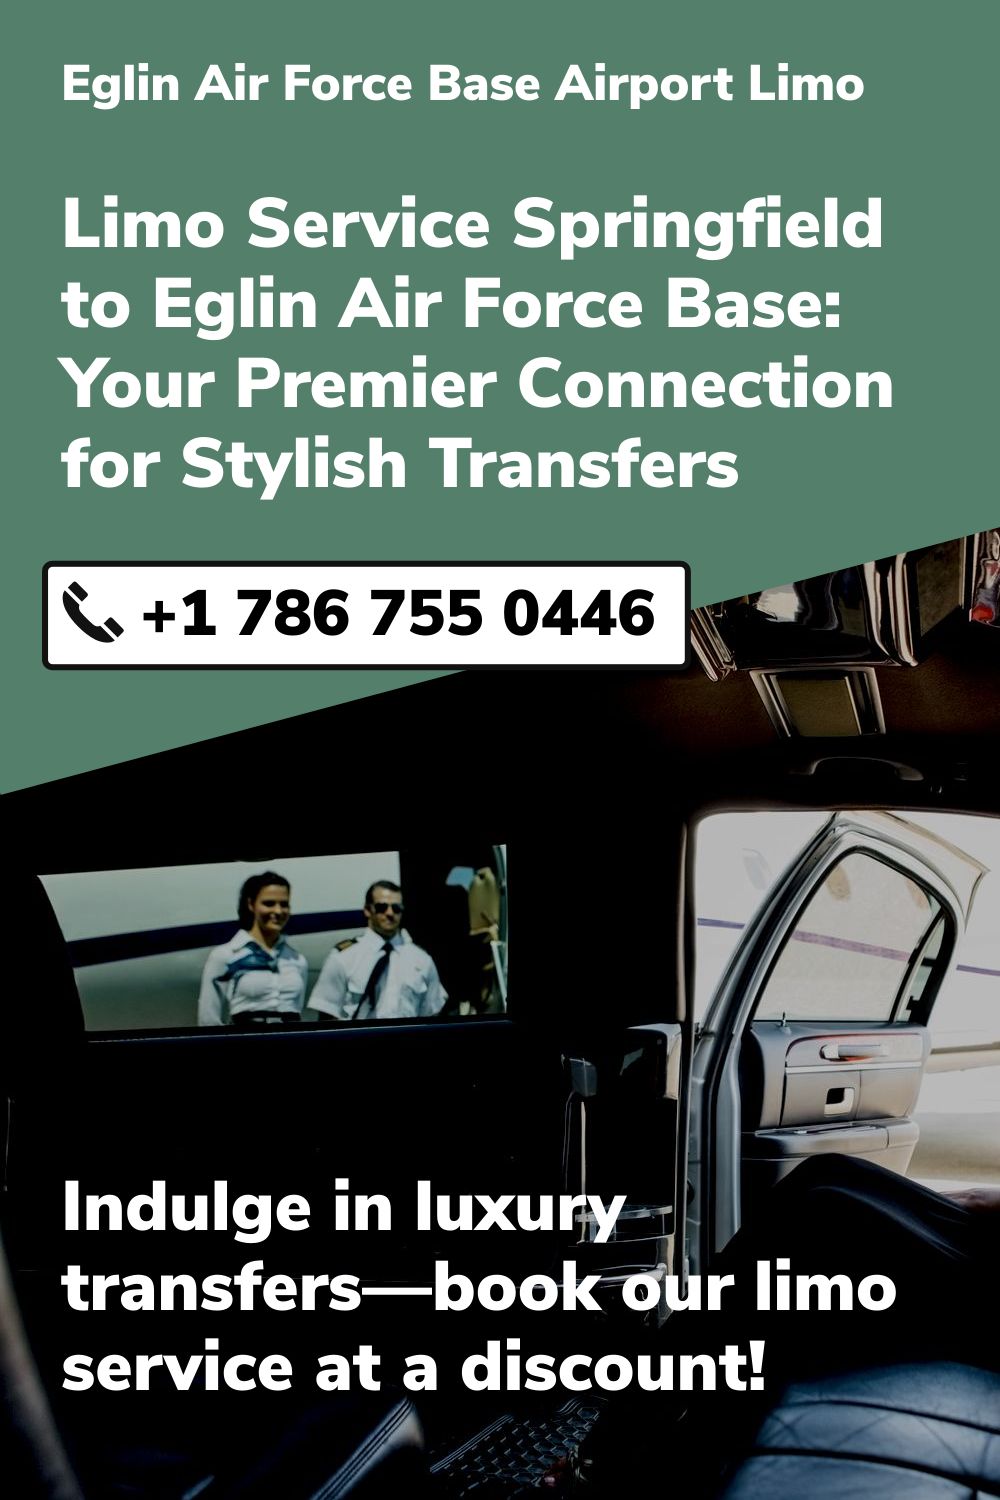 Eglin Air Force Base Airport Limo